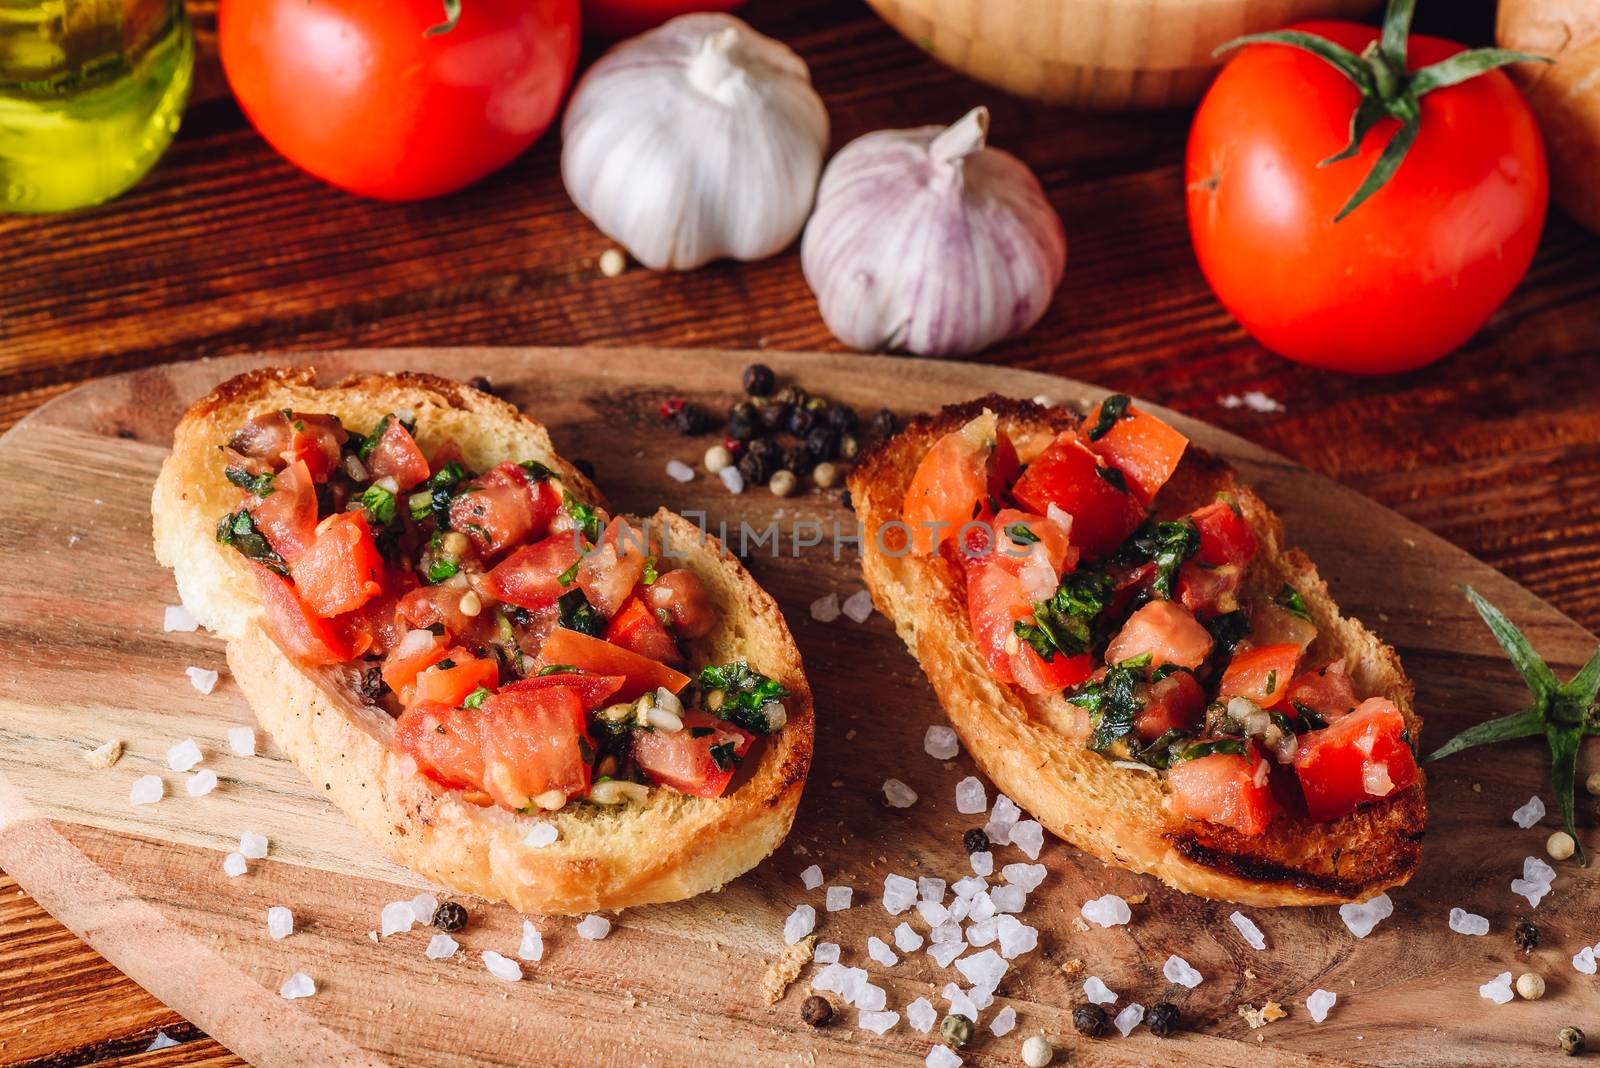 Classic Italian Bruschetta with Tomatoes and Some Ingredients on Background